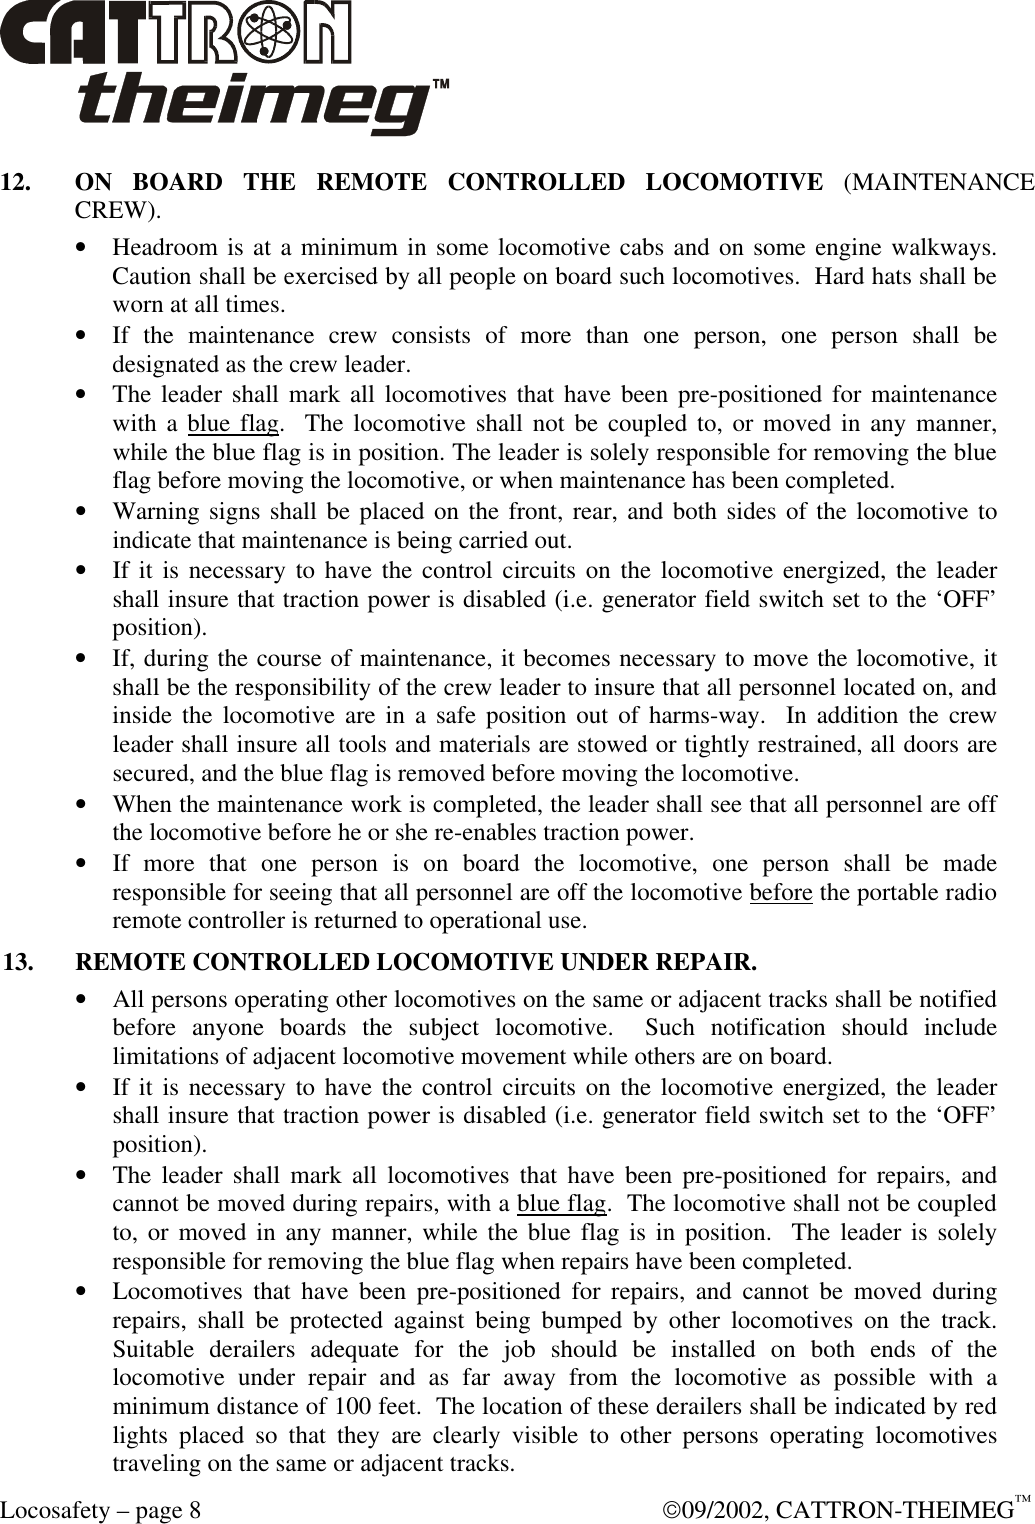  Locosafety – page 8  09/2002, CATTRON-THEIMEG™ 12. ON BOARD THE REMOTE CONTROLLED LOCOMOTIVE (MAINTENANCE CREW). • Headroom is at a minimum in some locomotive cabs and on some engine walkways.  Caution shall be exercised by all people on board such locomotives.  Hard hats shall be worn at all times. • If the maintenance crew consists of more than one person, one person shall be designated as the crew leader. • The leader shall mark all locomotives that have been pre-positioned for maintenance with a blue flag.  The locomotive shall not be coupled to, or moved in any manner, while the blue flag is in position. The leader is solely responsible for removing the blue flag before moving the locomotive, or when maintenance has been completed. • Warning signs shall be placed on the front, rear, and both sides of the locomotive to indicate that maintenance is being carried out. • If it is necessary to have the control circuits on the locomotive energized, the leader shall insure that traction power is disabled (i.e. generator field switch set to the ‘OFF’ position). • If, during the course of maintenance, it becomes necessary to move the locomotive, it shall be the responsibility of the crew leader to insure that all personnel located on, and inside the locomotive are in a safe position out of harms-way.  In addition the crew leader shall insure all tools and materials are stowed or tightly restrained, all doors are secured, and the blue flag is removed before moving the locomotive. • When the maintenance work is completed, the leader shall see that all personnel are off the locomotive before he or she re-enables traction power.  • If more that one person is on board the locomotive, one person shall be made responsible for seeing that all personnel are off the locomotive before the portable radio remote controller is returned to operational use. 13. REMOTE CONTROLLED LOCOMOTIVE UNDER REPAIR. • All persons operating other locomotives on the same or adjacent tracks shall be notified before anyone boards the subject locomotive.  Such notification should include limitations of adjacent locomotive movement while others are on board. • If it is necessary to have the control circuits on the locomotive energized, the leader shall insure that traction power is disabled (i.e. generator field switch set to the ‘OFF’ position). • The leader shall mark all locomotives that have been pre-positioned for repairs, and cannot be moved during repairs, with a blue flag.  The locomotive shall not be coupled to, or moved in any manner, while the blue flag is in position.  The leader is solely responsible for removing the blue flag when repairs have been completed. • Locomotives that have been pre-positioned for repairs, and cannot be moved during repairs, shall be protected against being bumped by other locomotives on the track.  Suitable derailers adequate for the job should be installed on both ends of the locomotive under repair and as far away from the locomotive as possible with a minimum distance of 100 feet.  The location of these derailers shall be indicated by red lights placed so that they are clearly visible to other persons operating locomotives traveling on the same or adjacent tracks.  